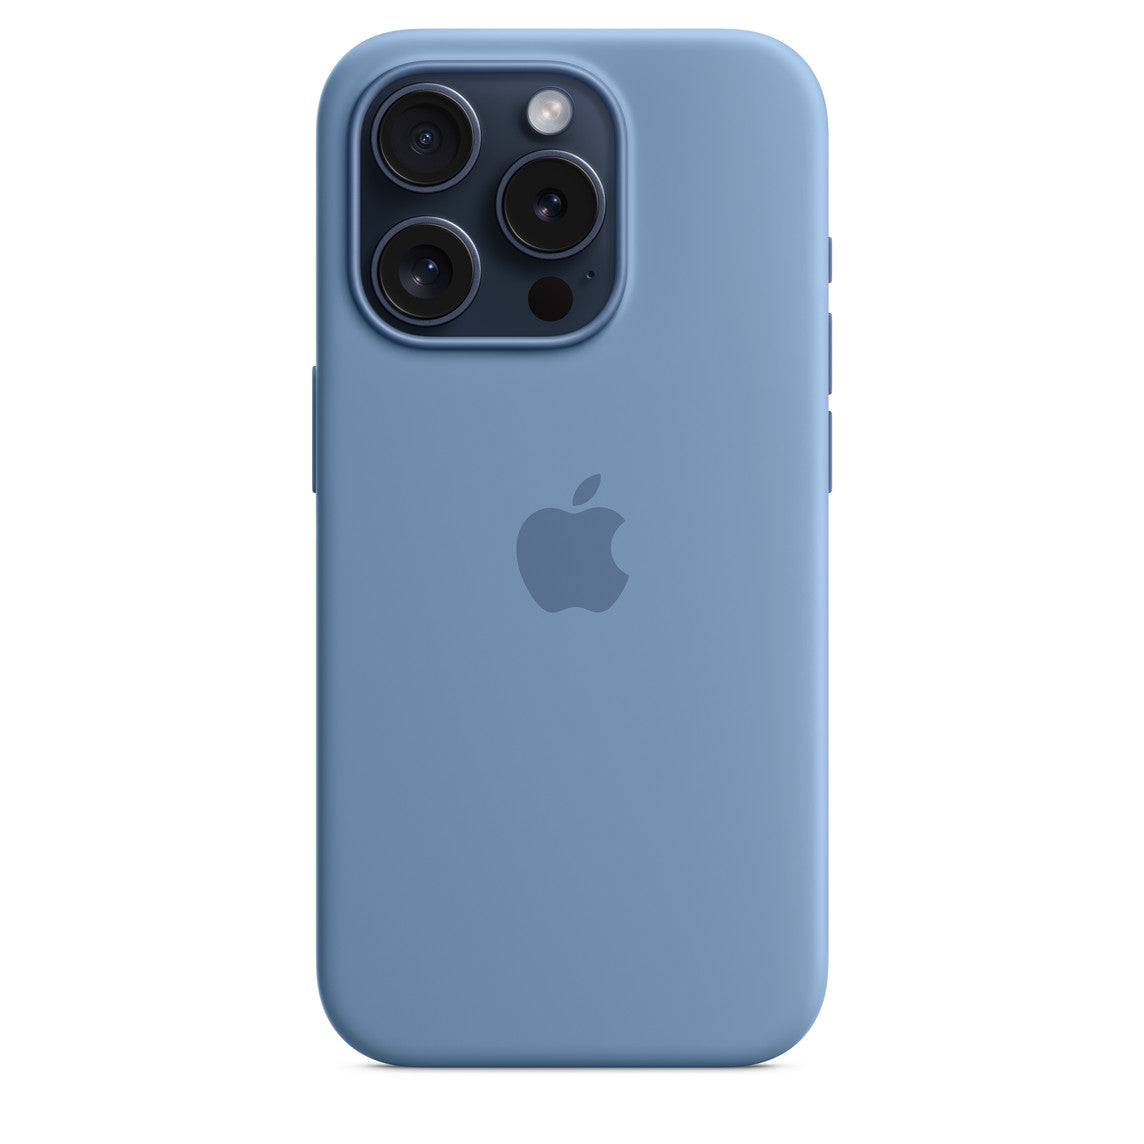 iPhone Pro’s Silicone Case